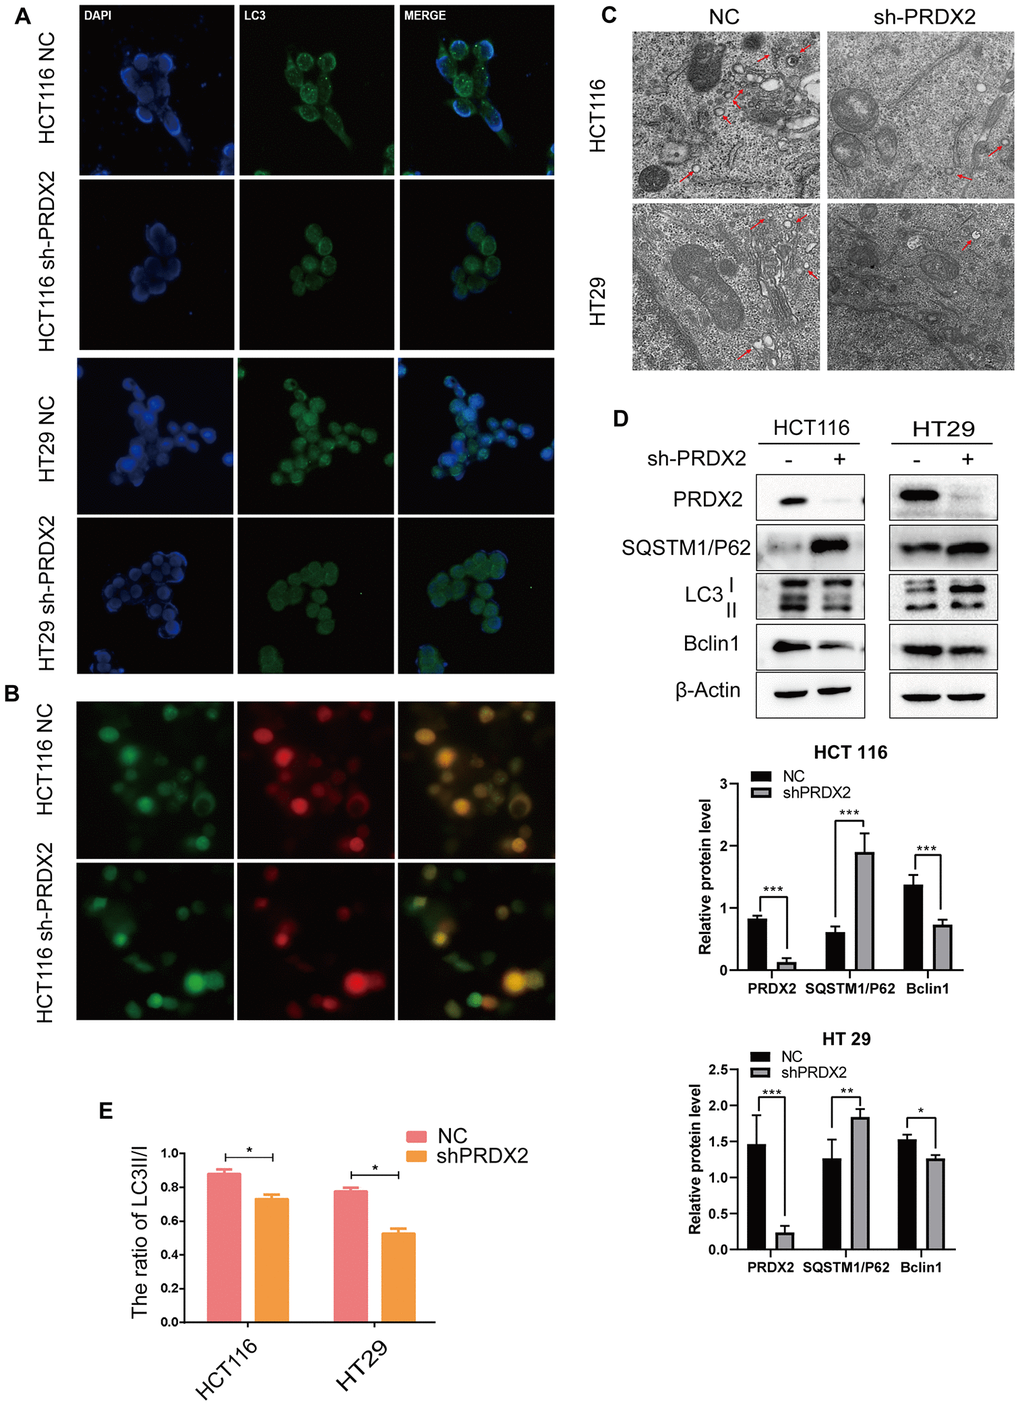 Knockdown of PRDX2 suppresses CRC cell autophagy flux. (A) Immunofluorescence images of GFP-labeled LC3B staining in sh-PRDX2 and control CRC cells. (B) NC and sh-PRDX2 cells were transfected with GFP-RFP-LC3 plasmids. (C) Sh-PRDX2 and control CRC cells were analyzed by transmission electron microscopy. Arrows indicate autophagosomes. (D) Western blot of autophagy-related proteins (LC3B, SQSTM1/P62, Beclin 1) in sh-PRDX2 and control CRC cells. (E) The ratio of LC3 II/I. The data are shown as the mean ± SD of three experiments. *P P P 